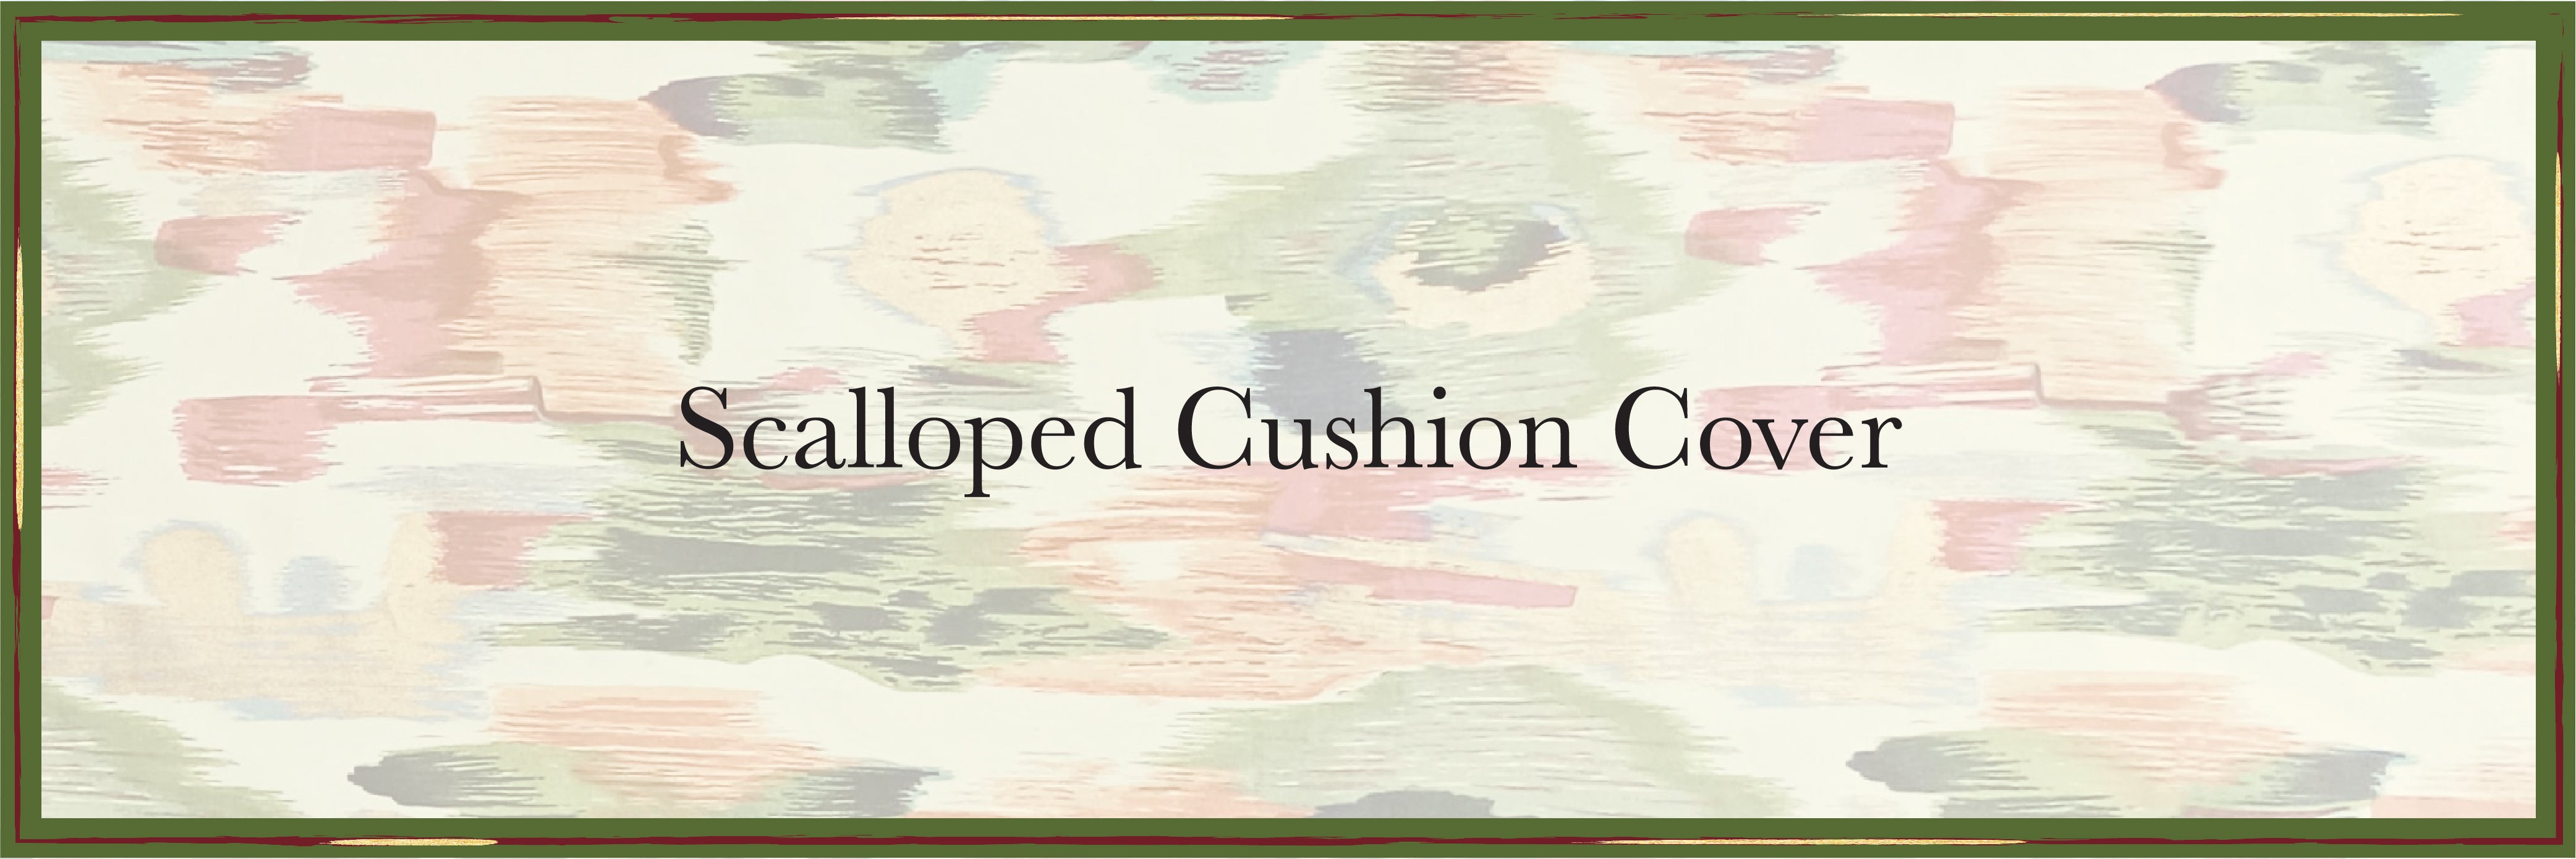 Scalloped Cushion Cover